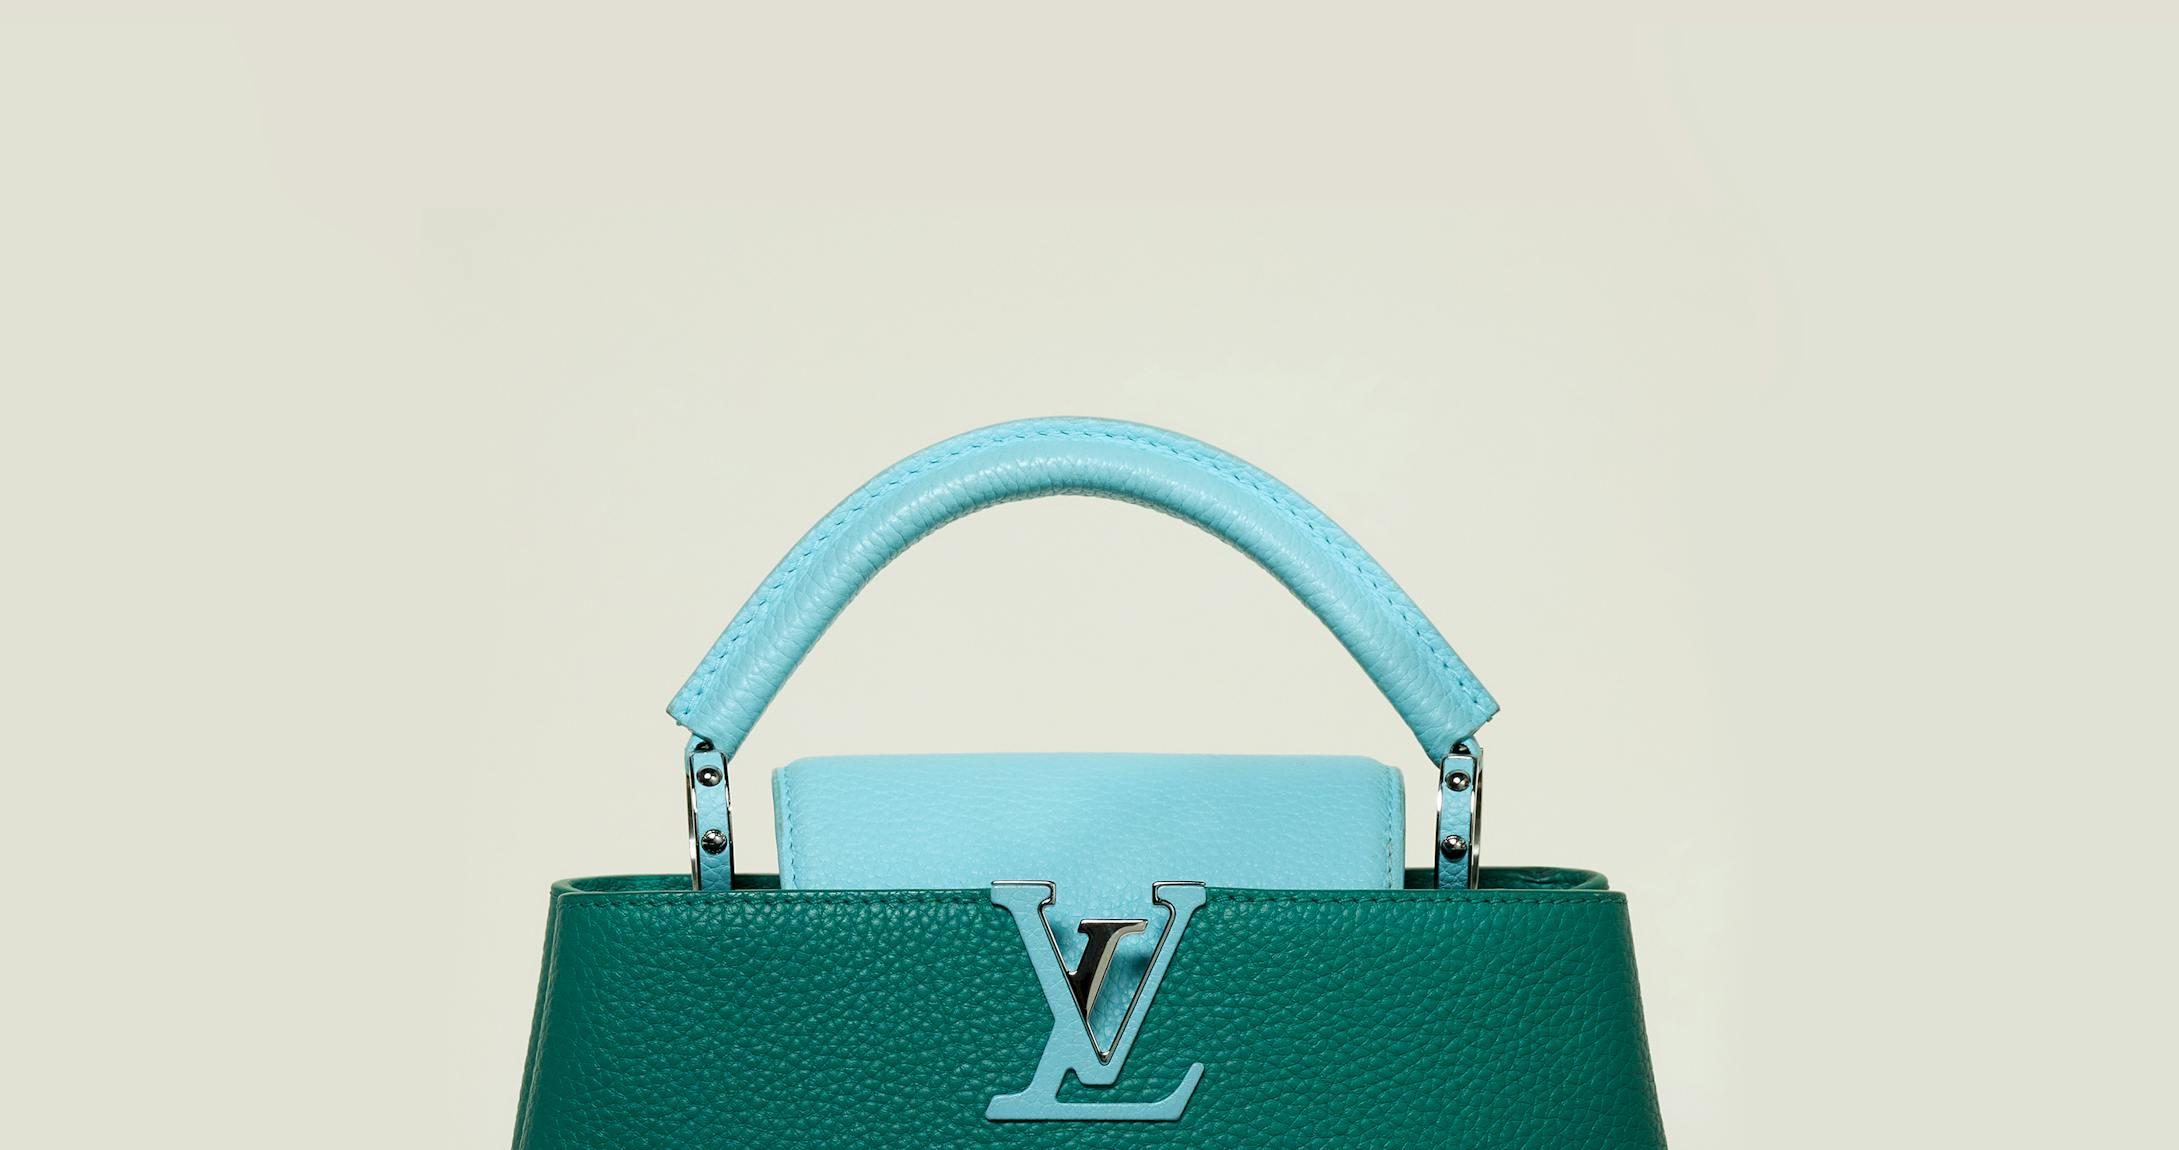 Sell Us Your Louis Vuitton Bags Online